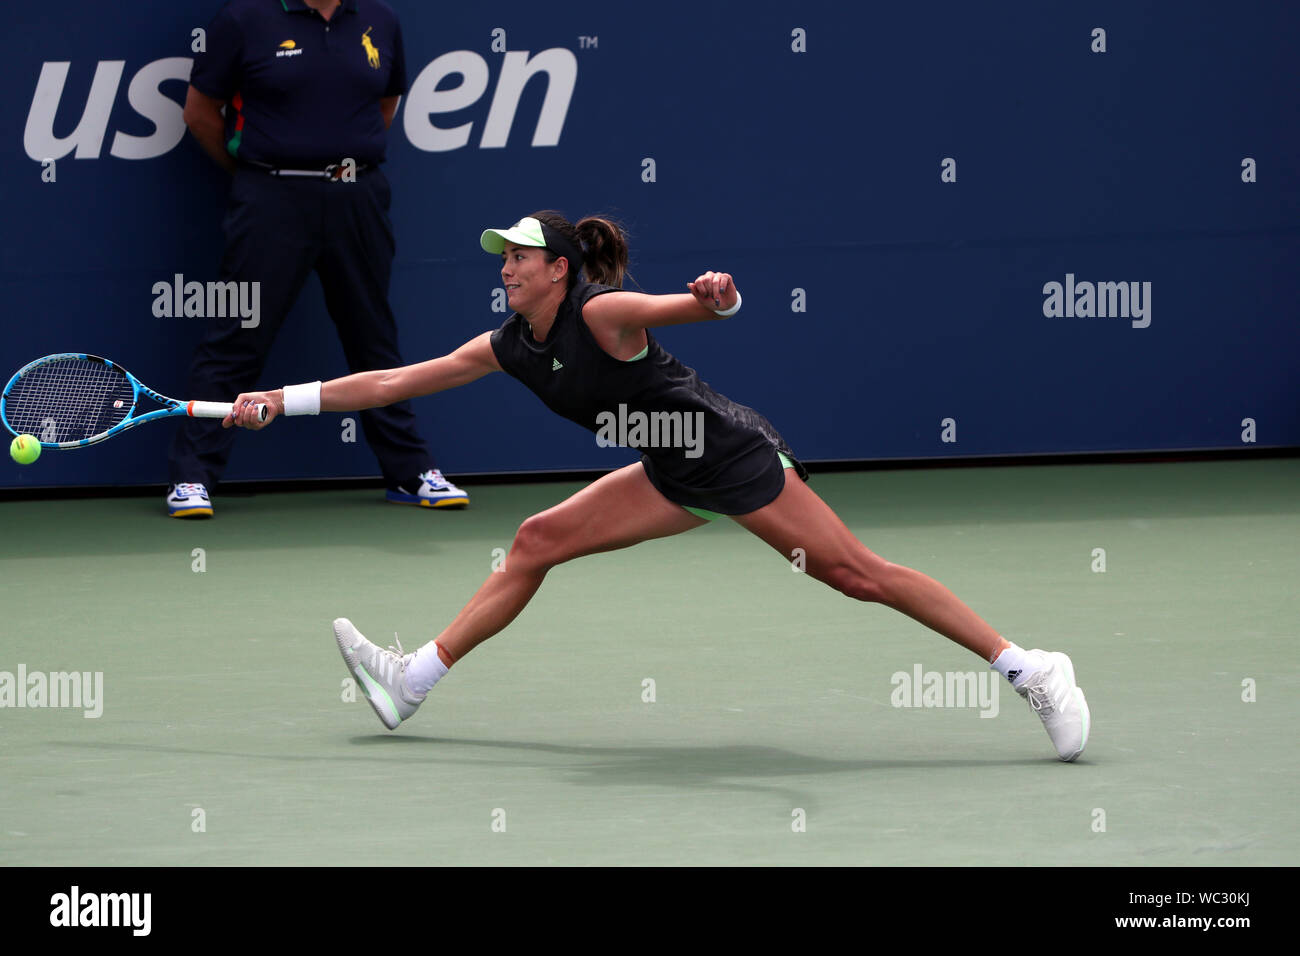 New York, USA. 27th Aug, 2019. Garbiñe Muguruza Blanco of Spain reaches wide for a forehand during her first round match against Alison Riske of the United States at the US Open in Flushing Meadows, New York.  Risks won the match in three sets Credit: Adam Stoltman/Alamy Live News Stock Photo